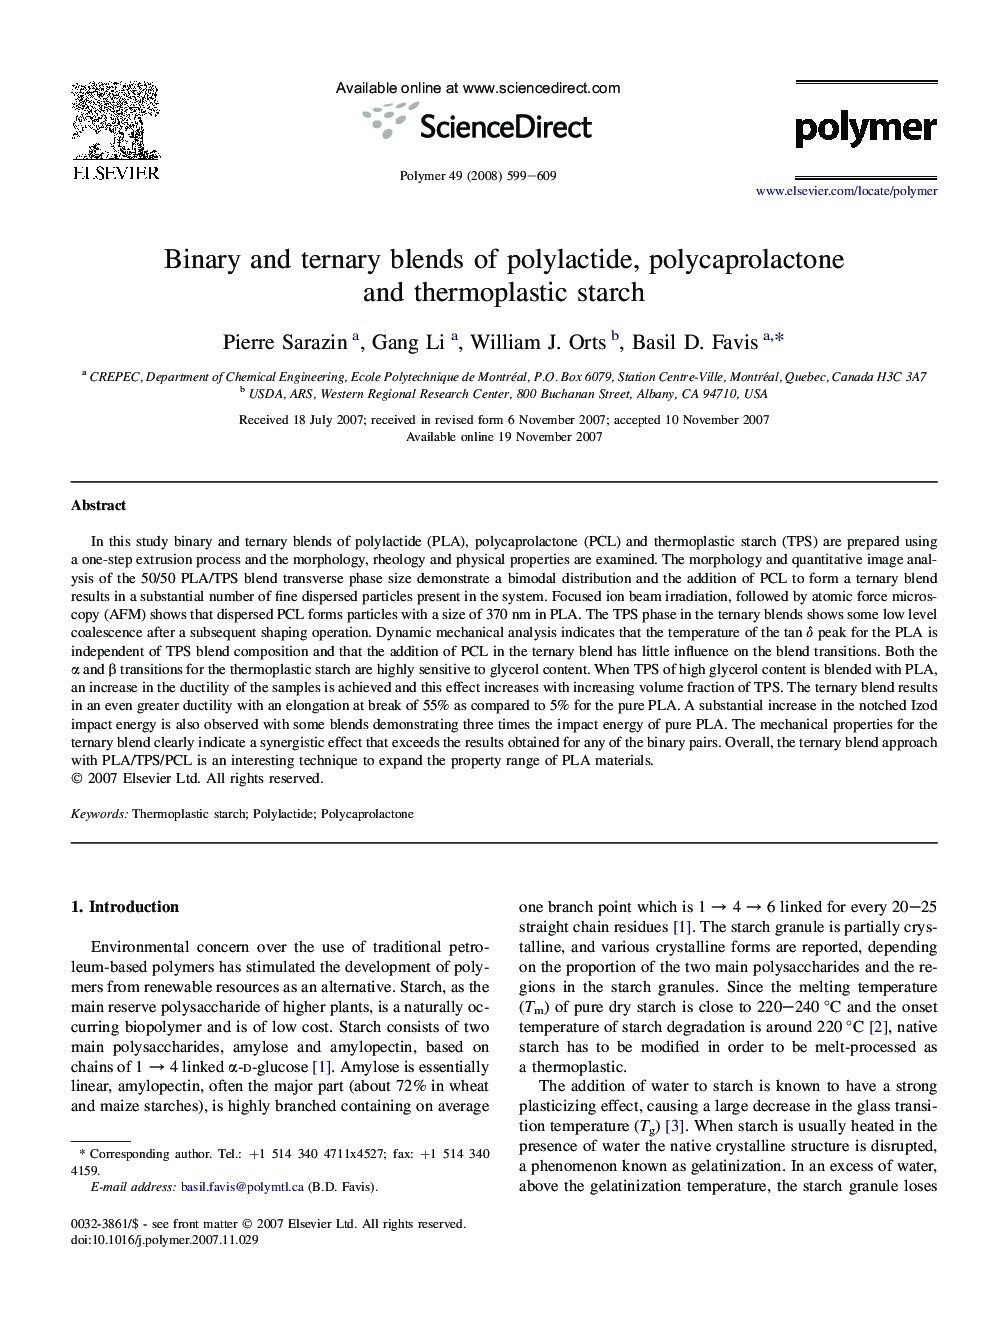 Binary and ternary blends of polylactide, polycaprolactone and thermoplastic starch